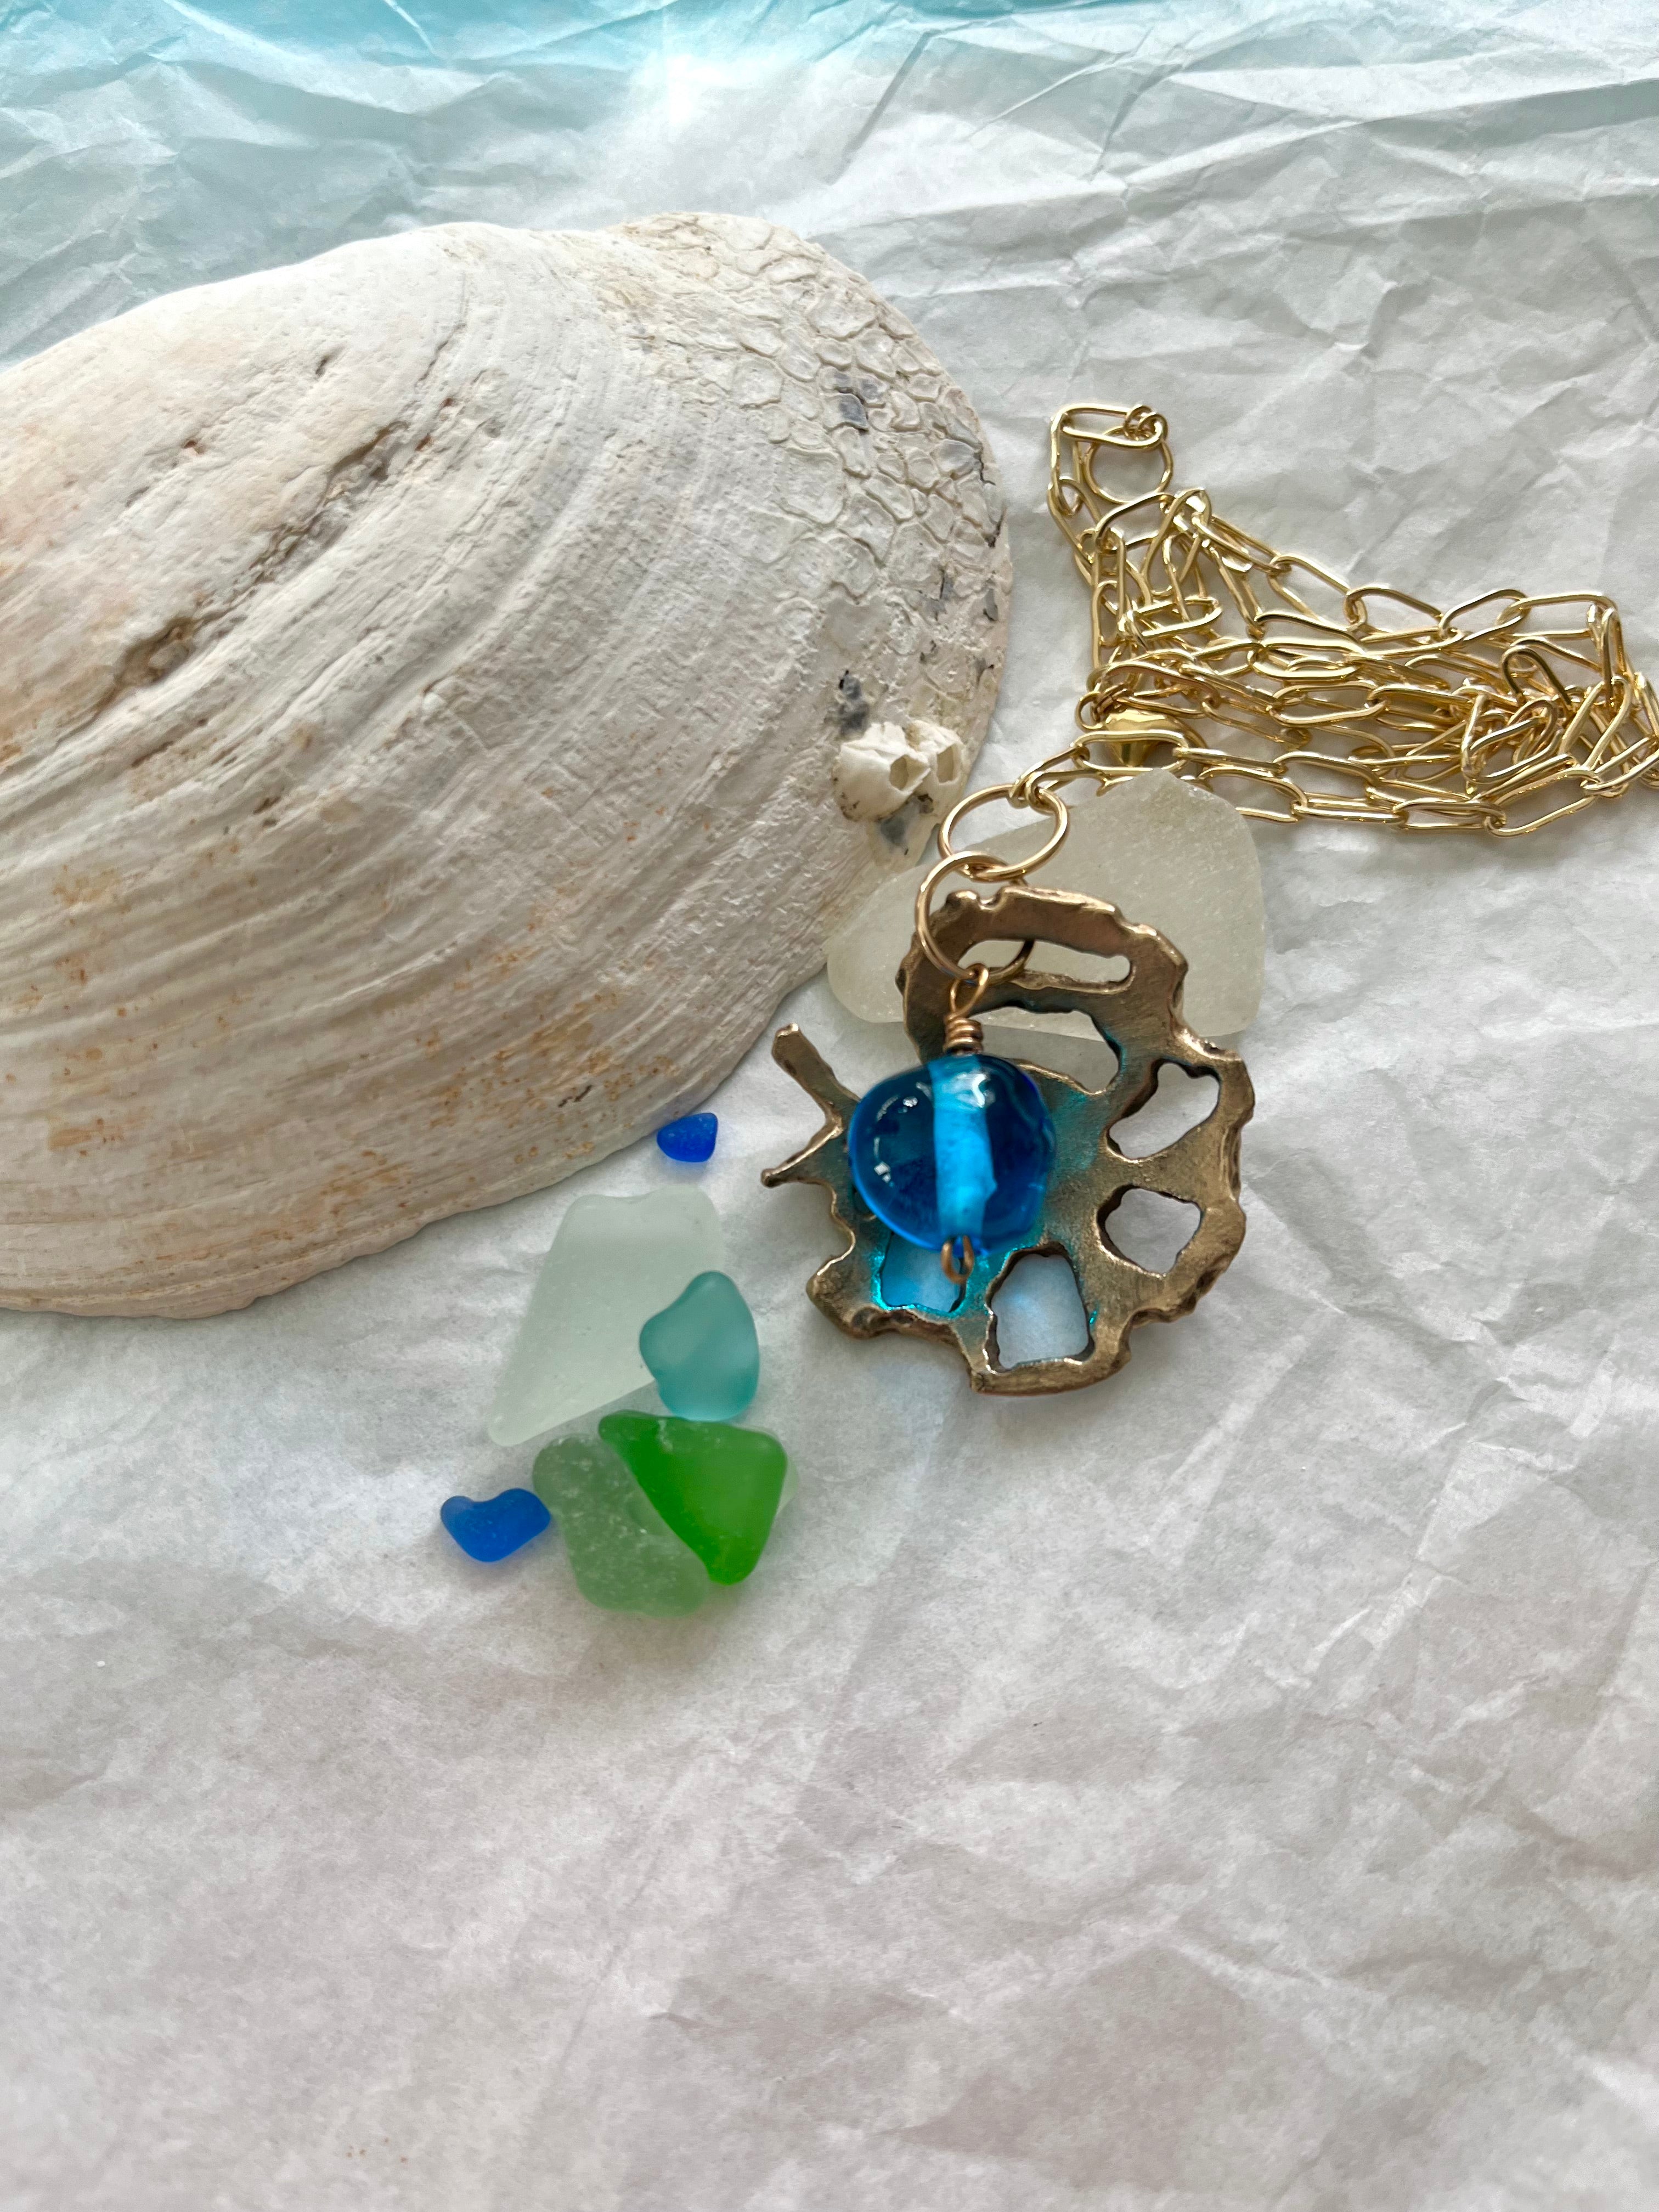 Coral inspired bronze necklace with seaglass in blues and greens